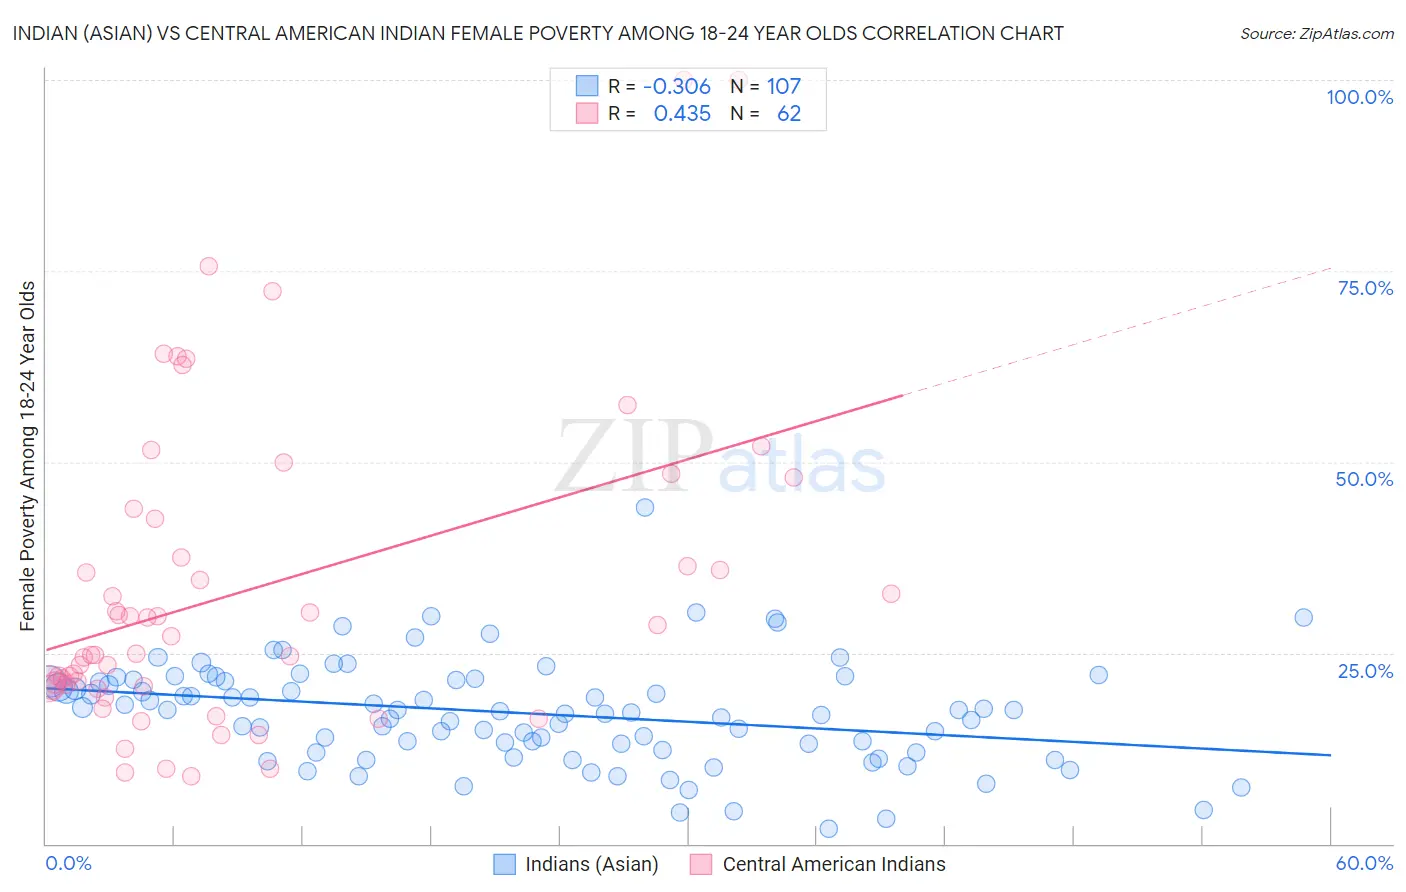 Indian (Asian) vs Central American Indian Female Poverty Among 18-24 Year Olds